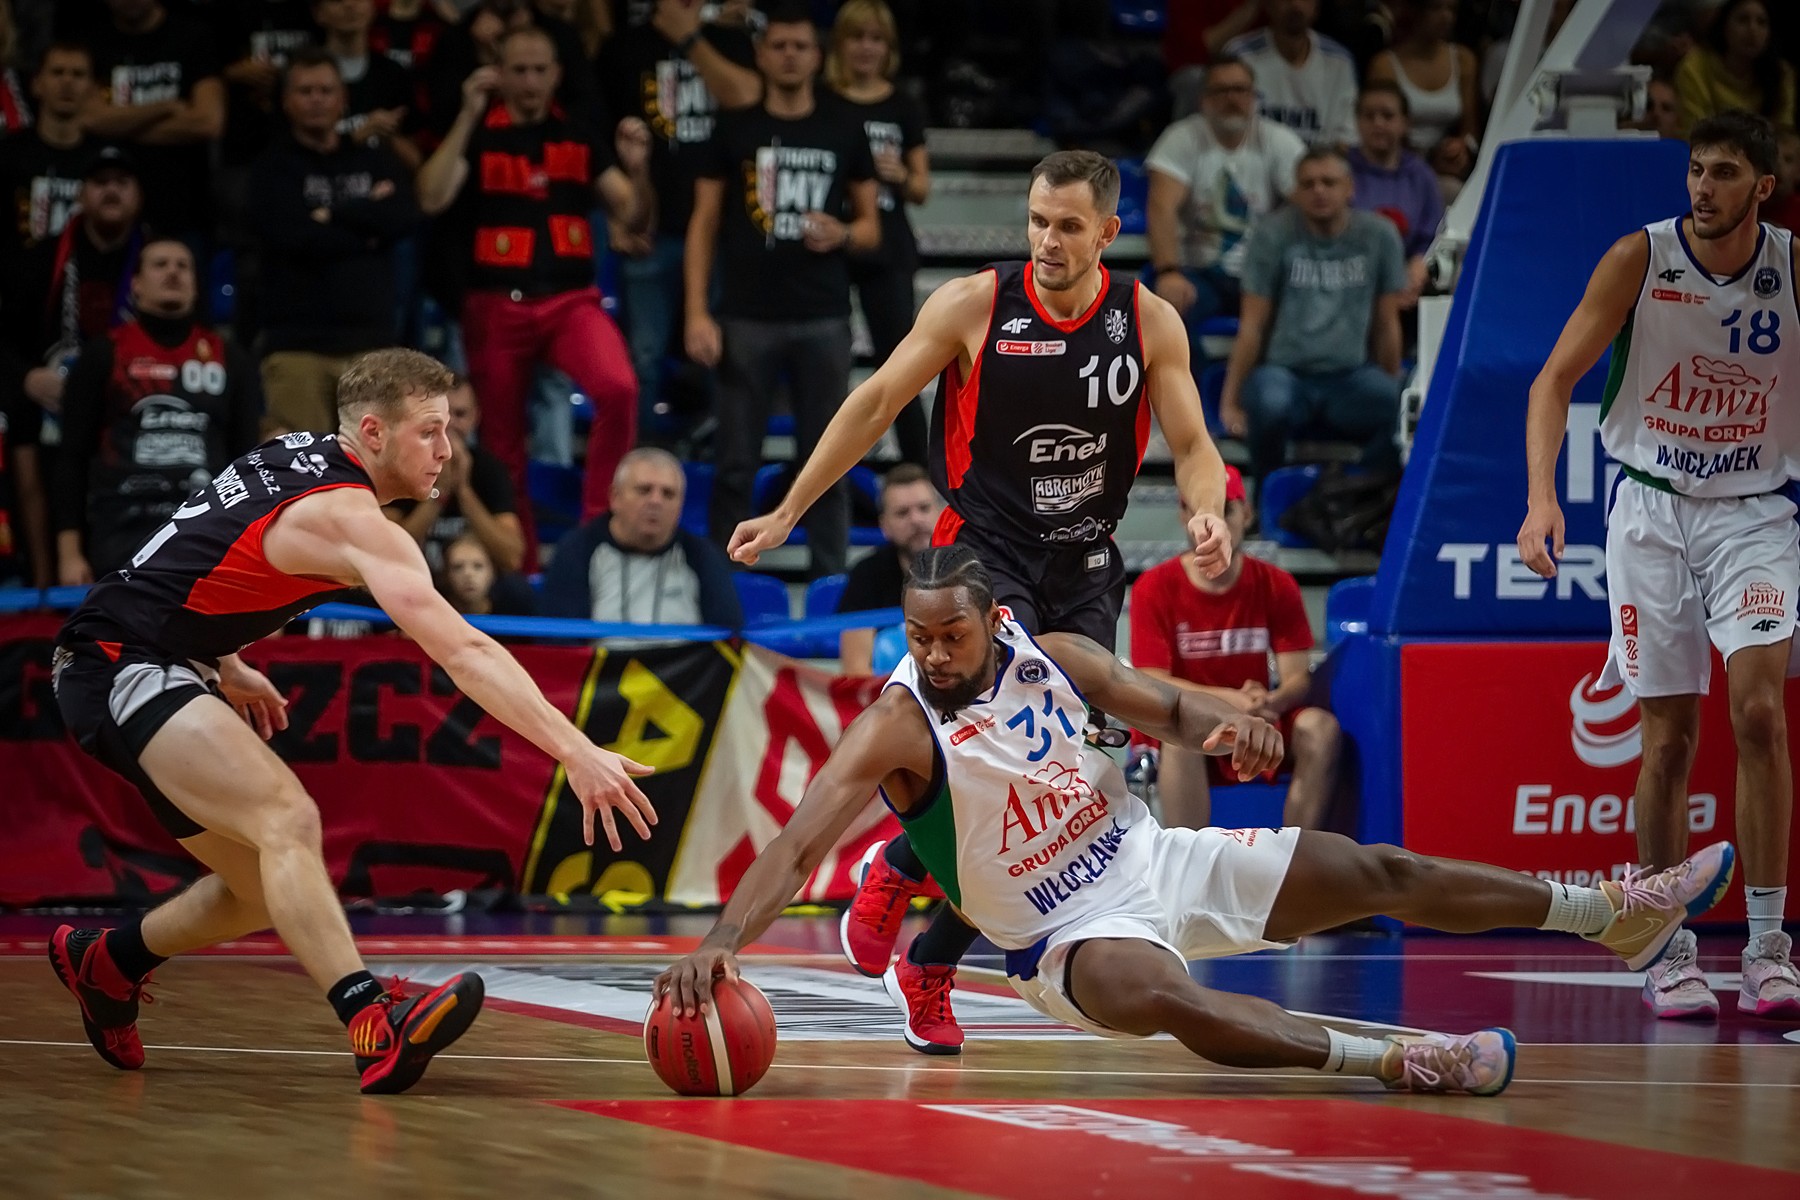 The Counter Of Wins Beats – Anwil Wins Derby Game